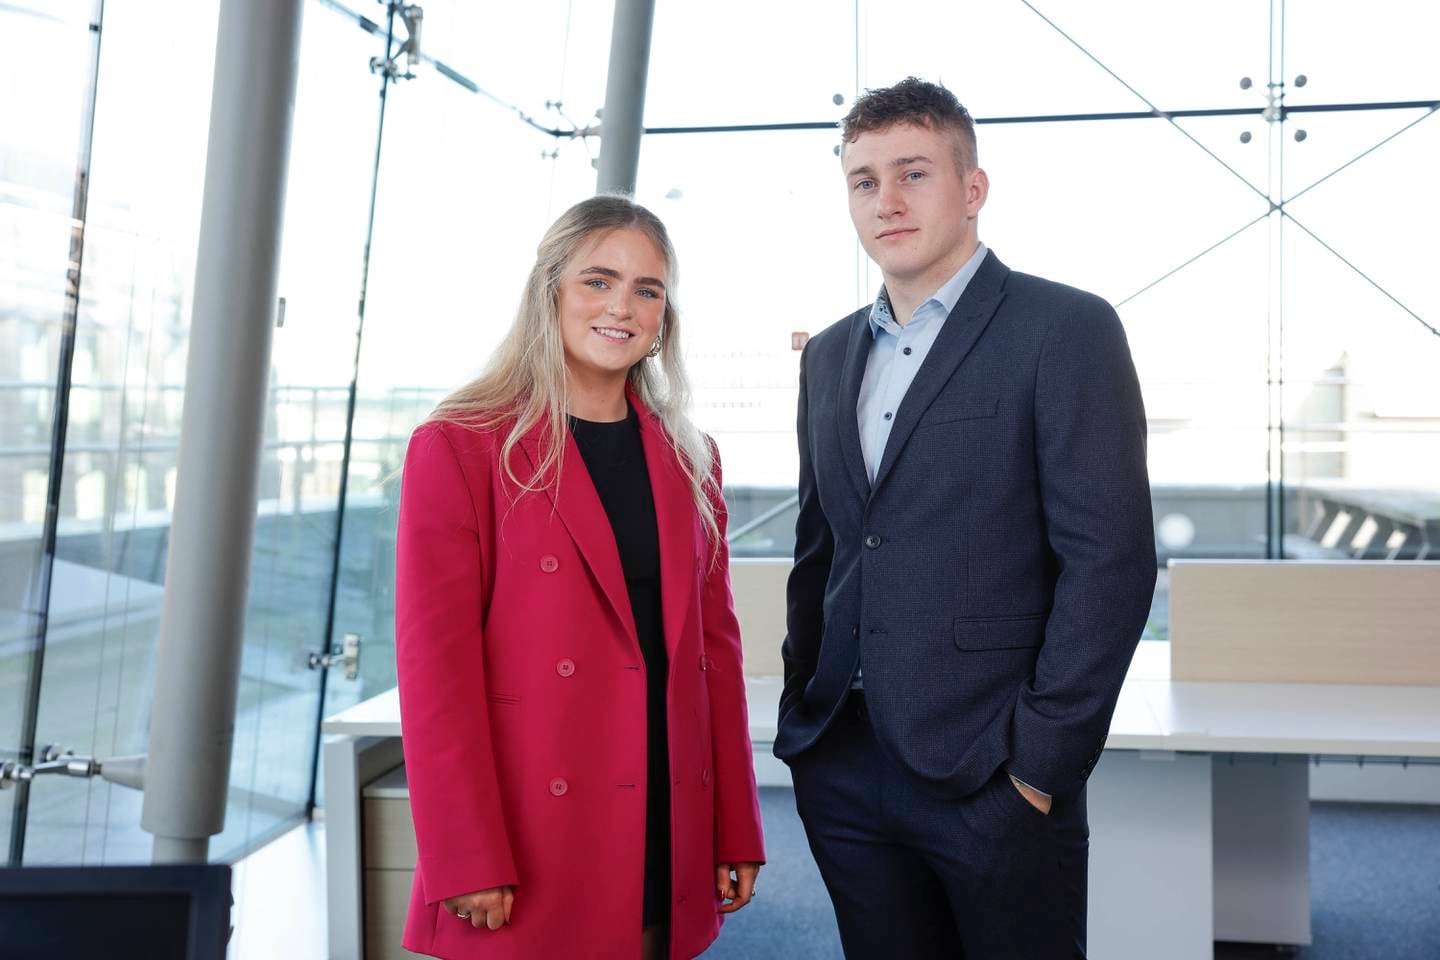 Ciara Walsh and James Fahey of Just Tip at The Irish Times Innovation Awards 2023 final judging day. Photograph: Conor McCabe Photography.